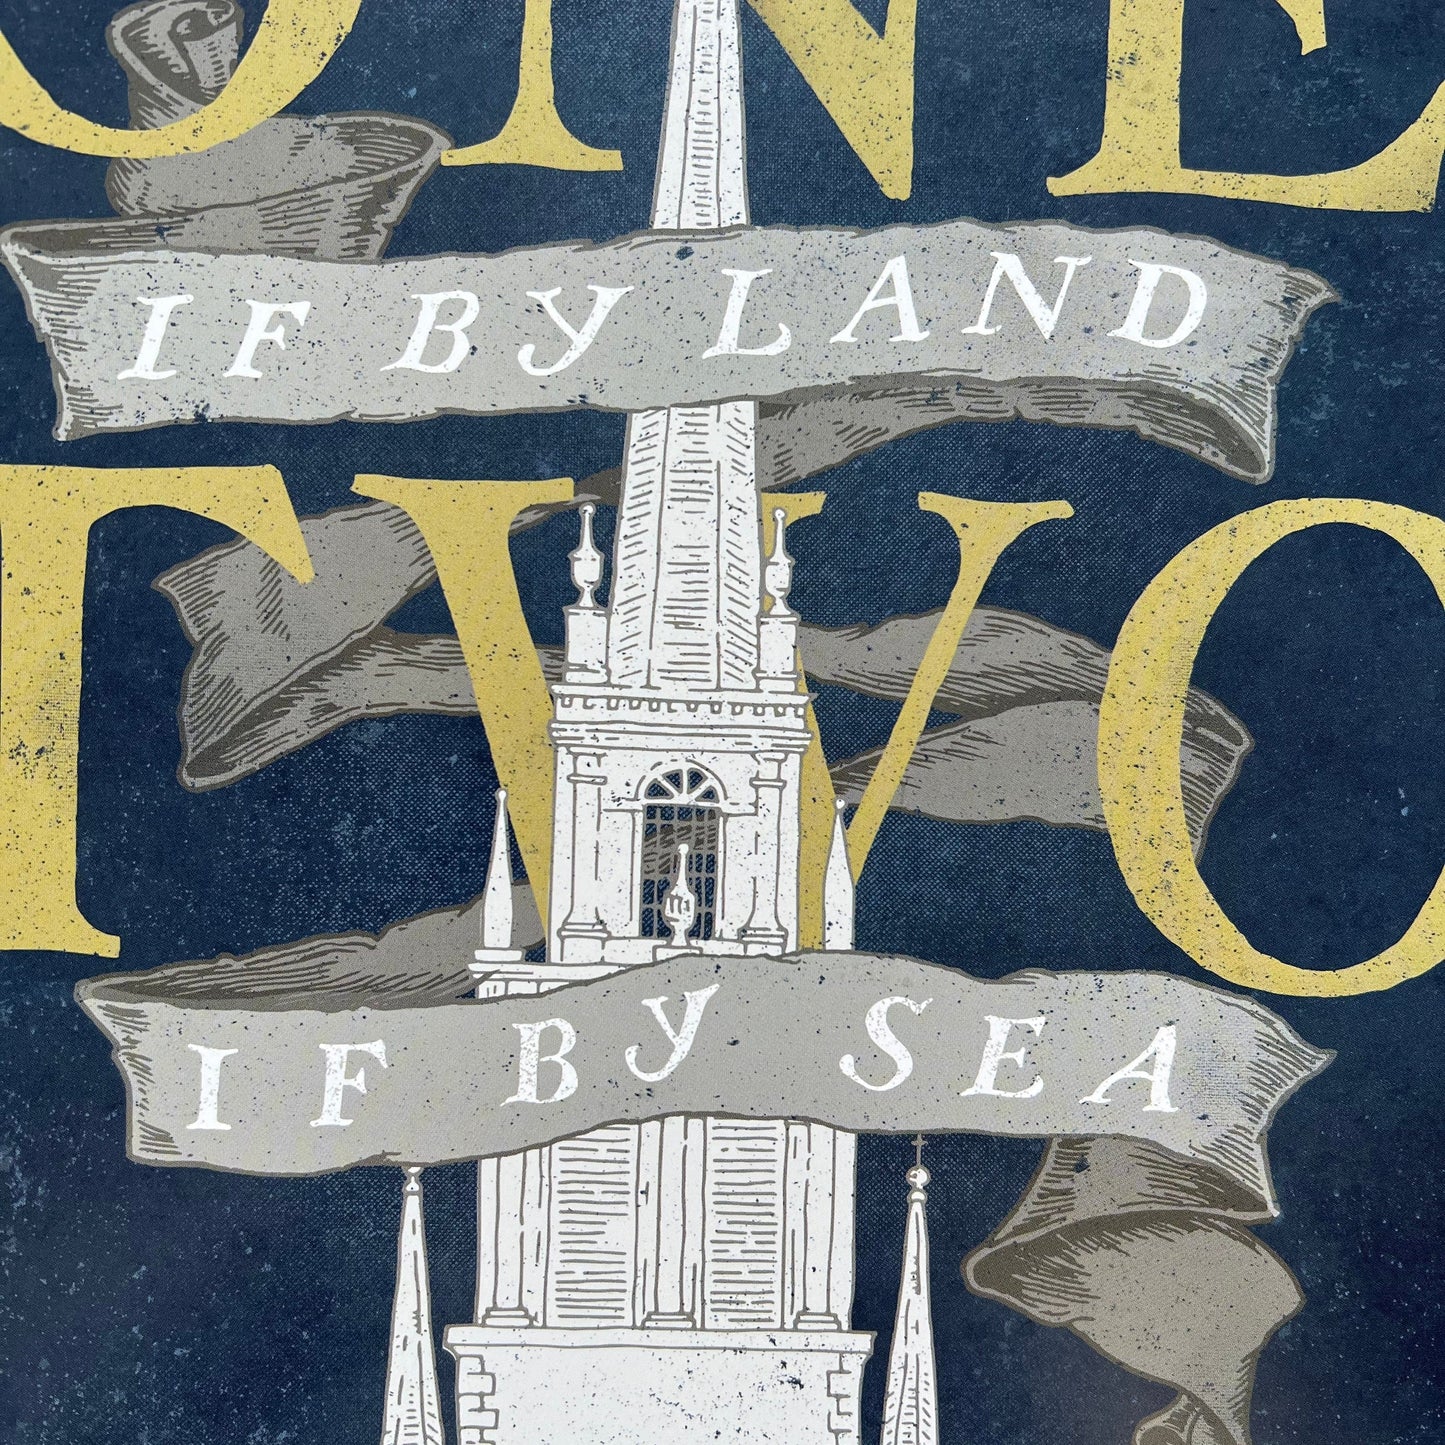 "One if by land . . ." as a small poster